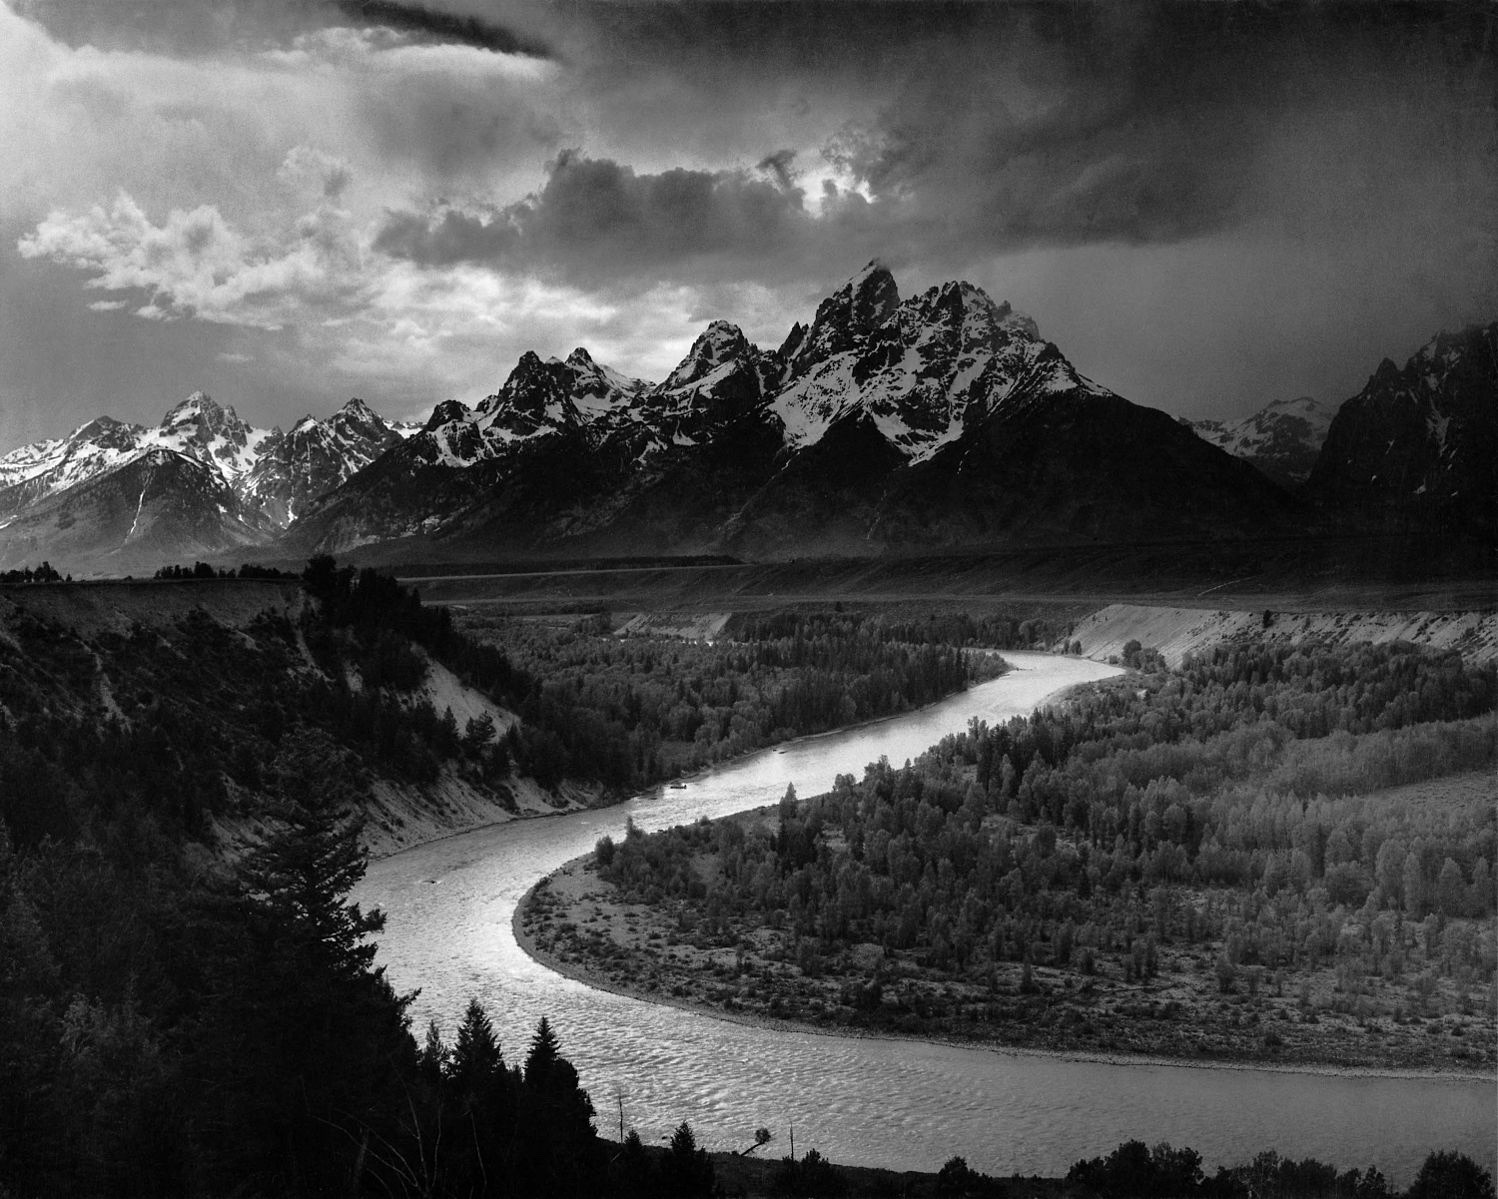 &quot;The Tetons and the Snake River,&quot; Ansel Adams' famous portrait of the Snake River in Grand Teton National Park.  A wending jewel in Greater Yellowstone, the Snake marries the Columbia River and is liquid lifeblood for the natural landscape, tourist economy, municipal water supplies and vital source for big agriculture in Idaho.  Photo courtesy National Park Service